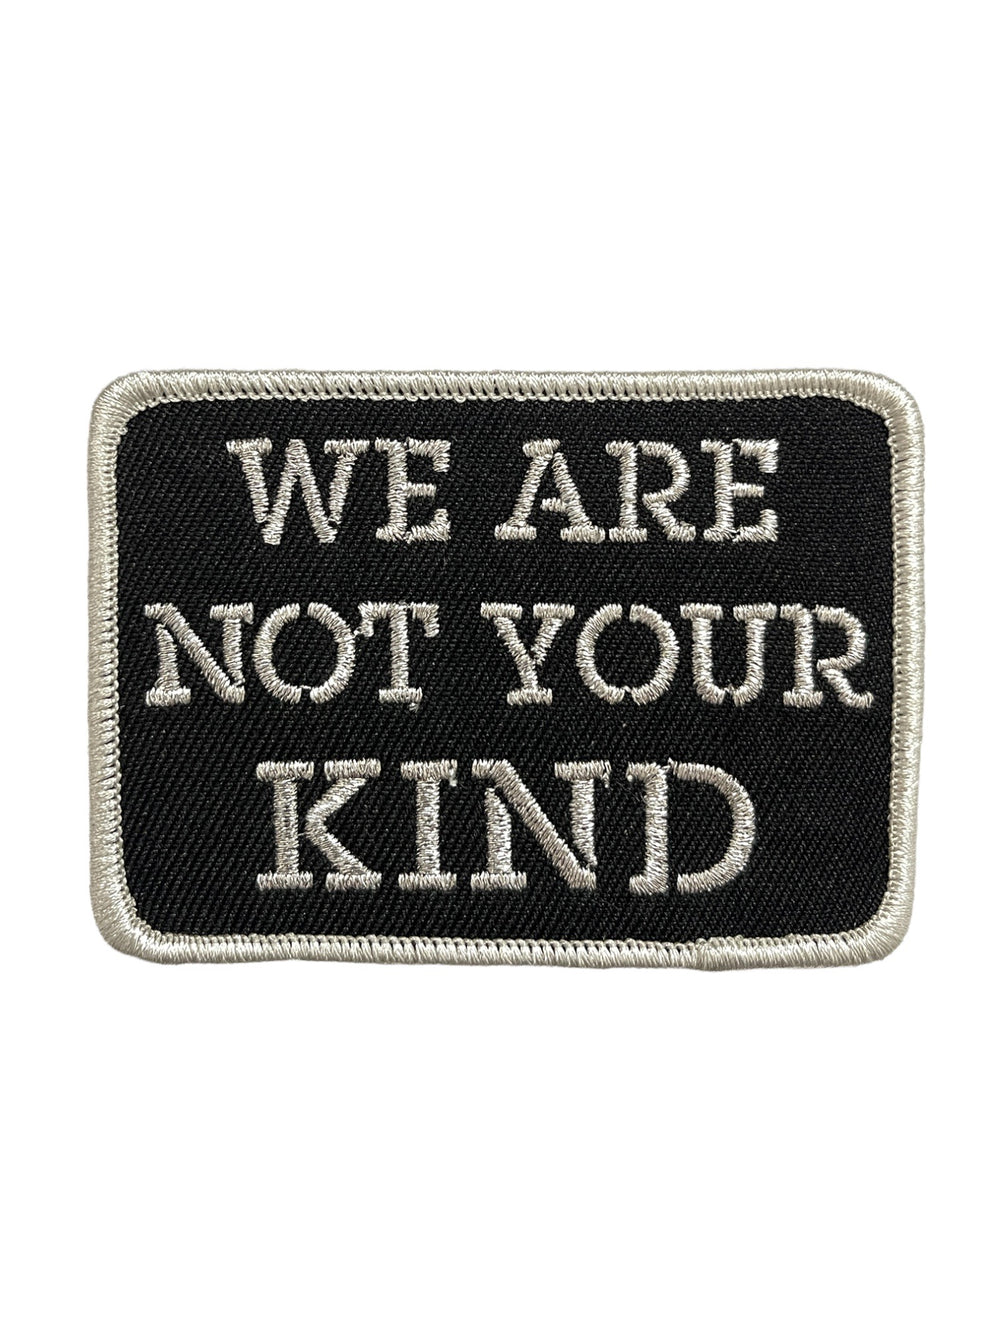 Slipknot We Are Not Your Kind Stencil Official Woven Patch Brand New